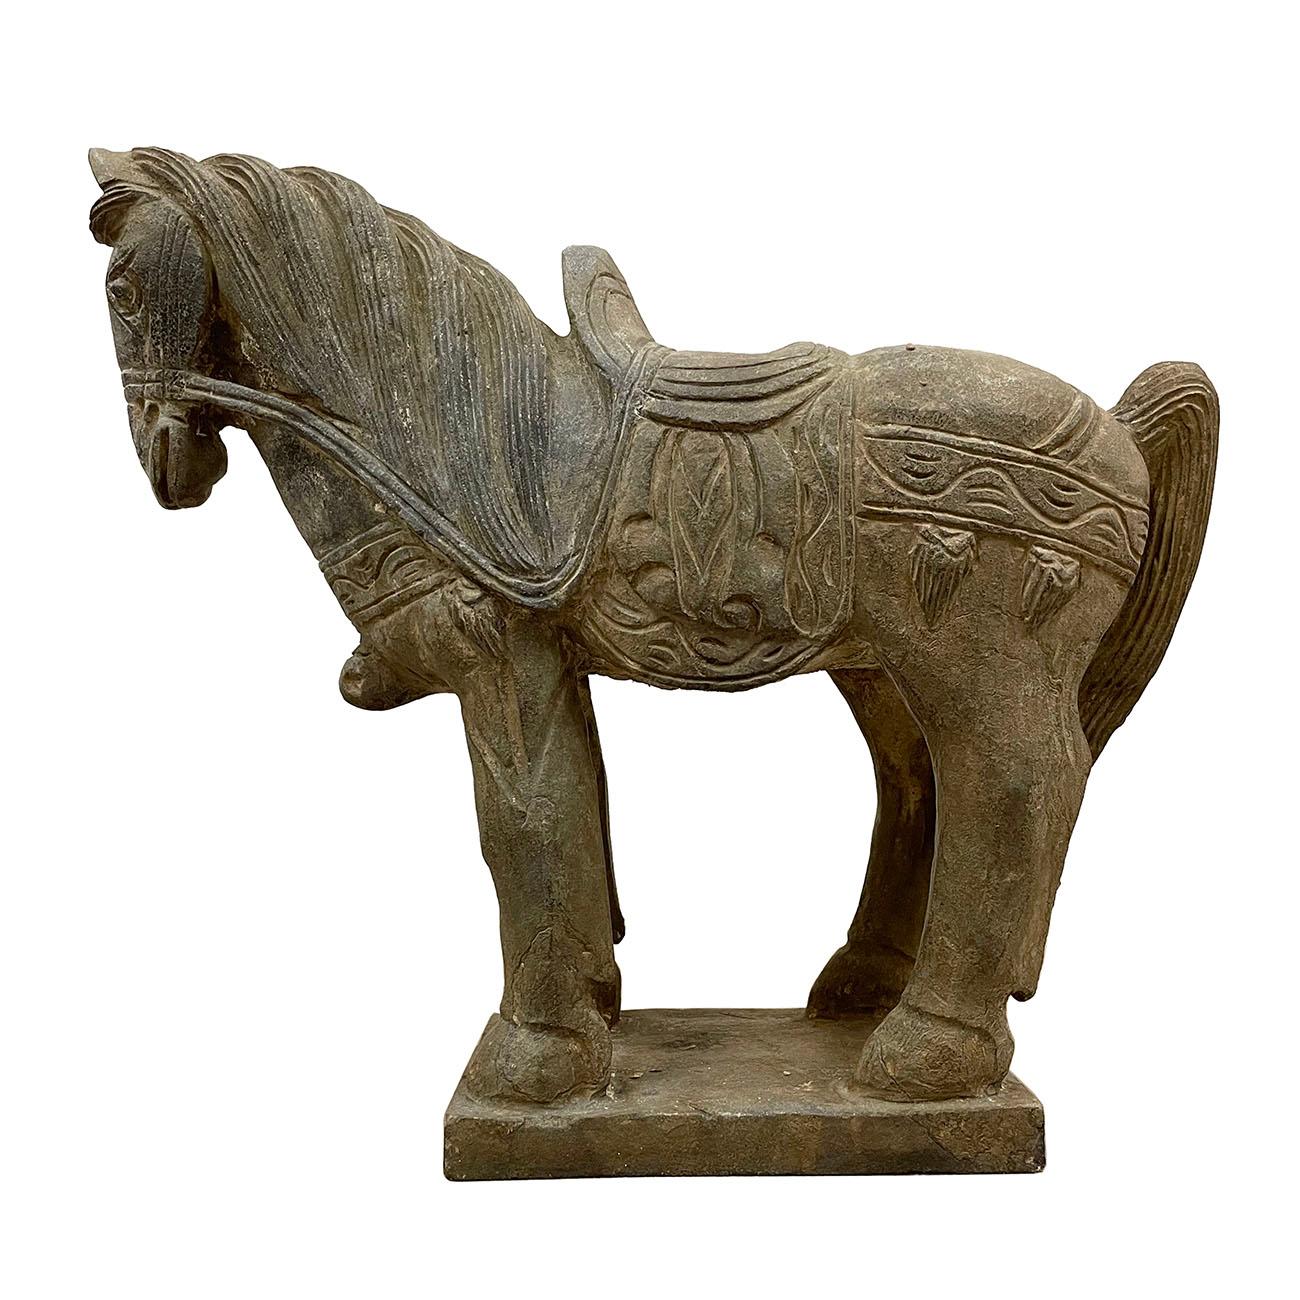 Chinese Export Early 20th Century Chinese Vintage Carved Stone Horse Statue/Sculpture For Sale